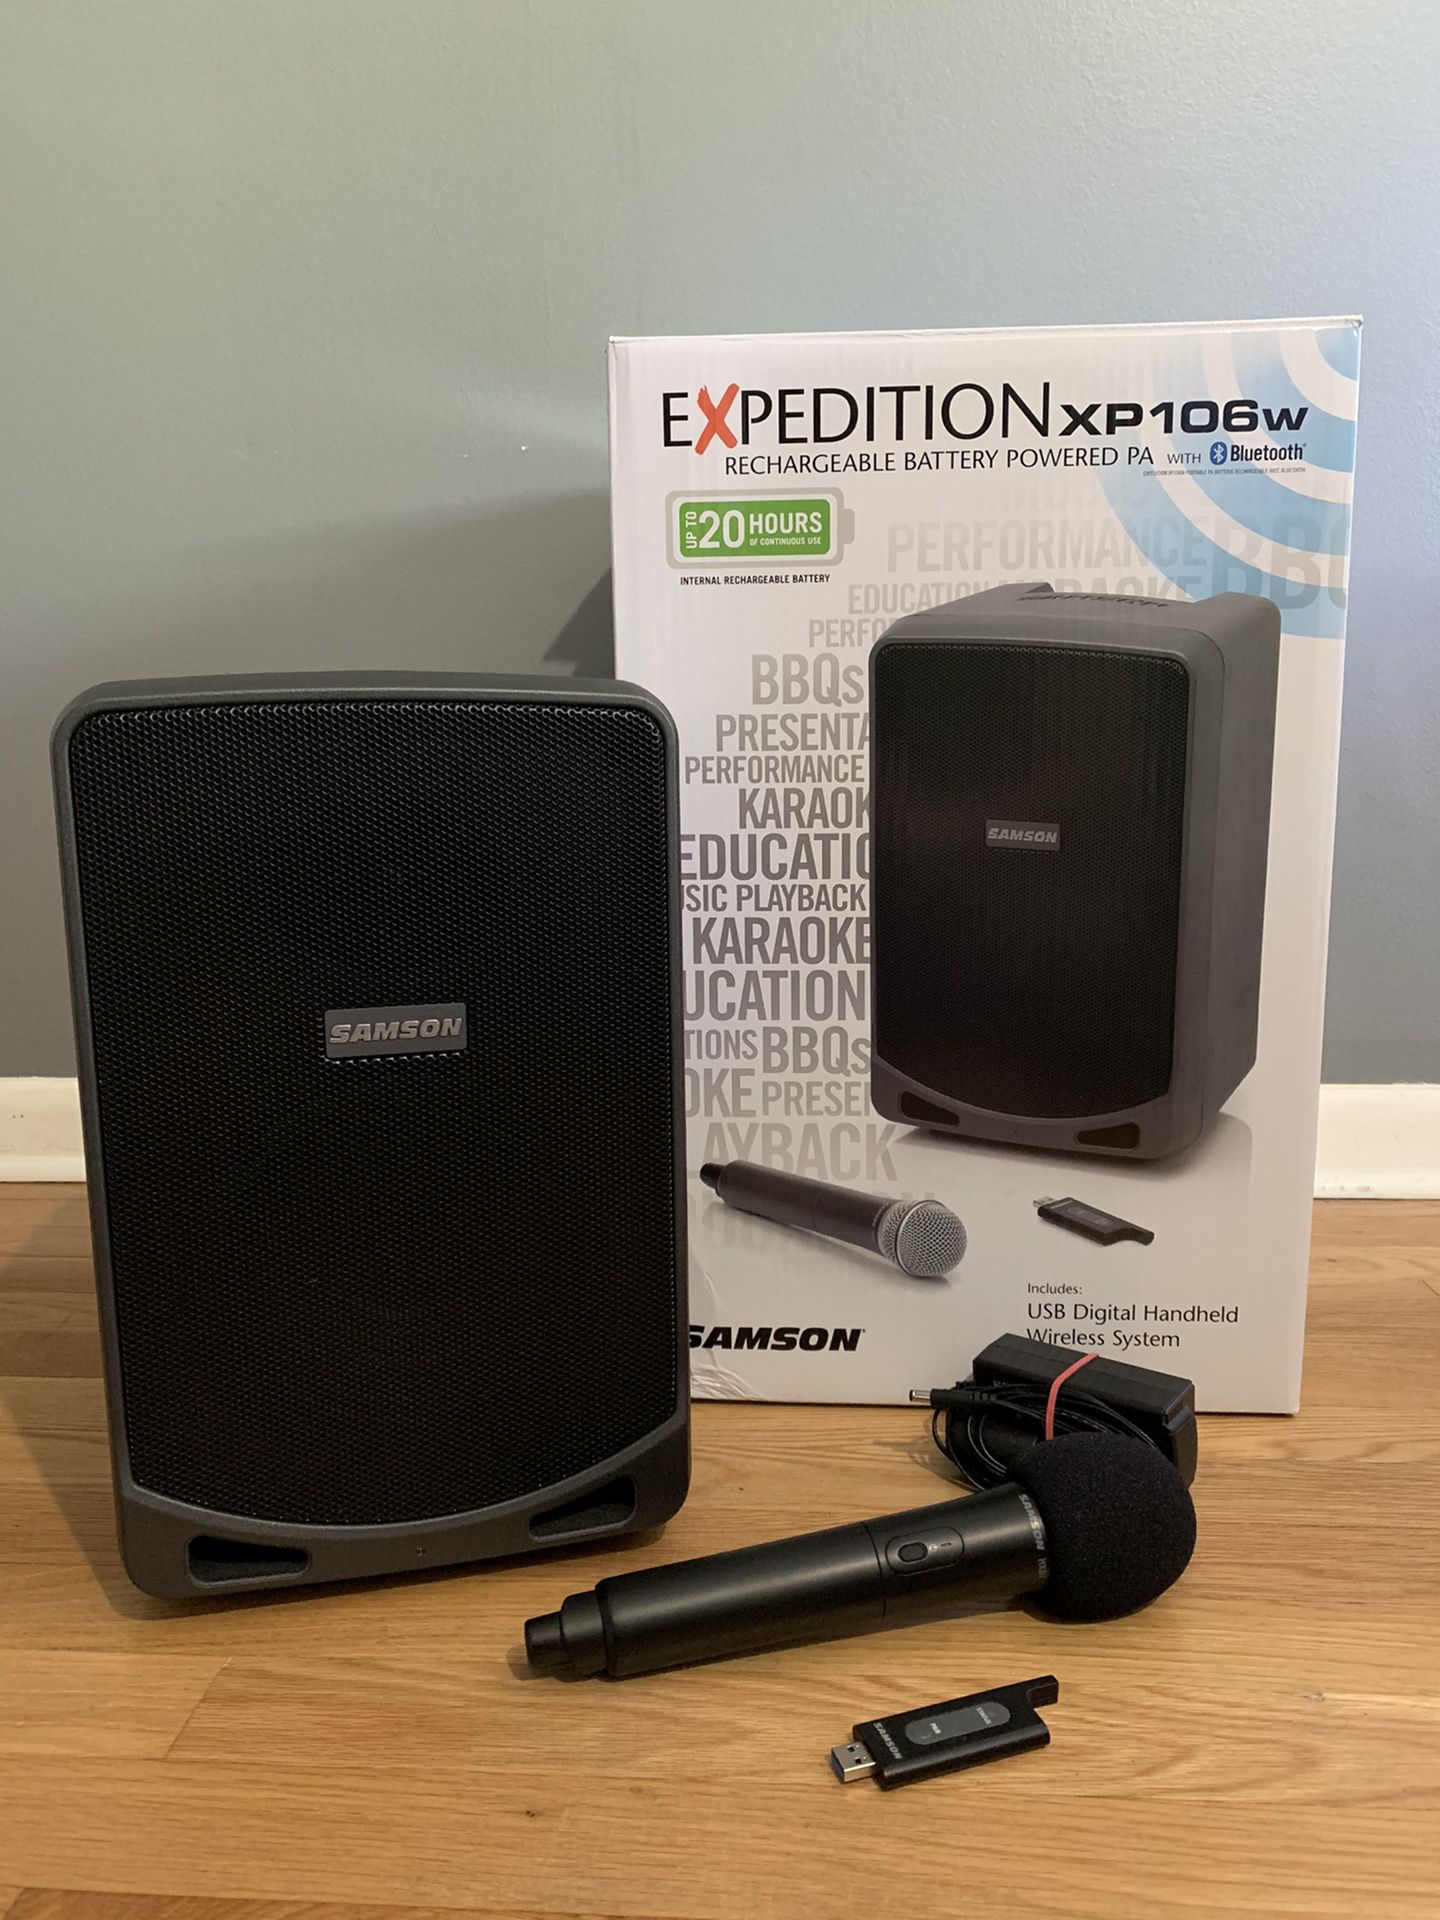 Samson Expedition rechargeable wireless Microphone PA System Dj